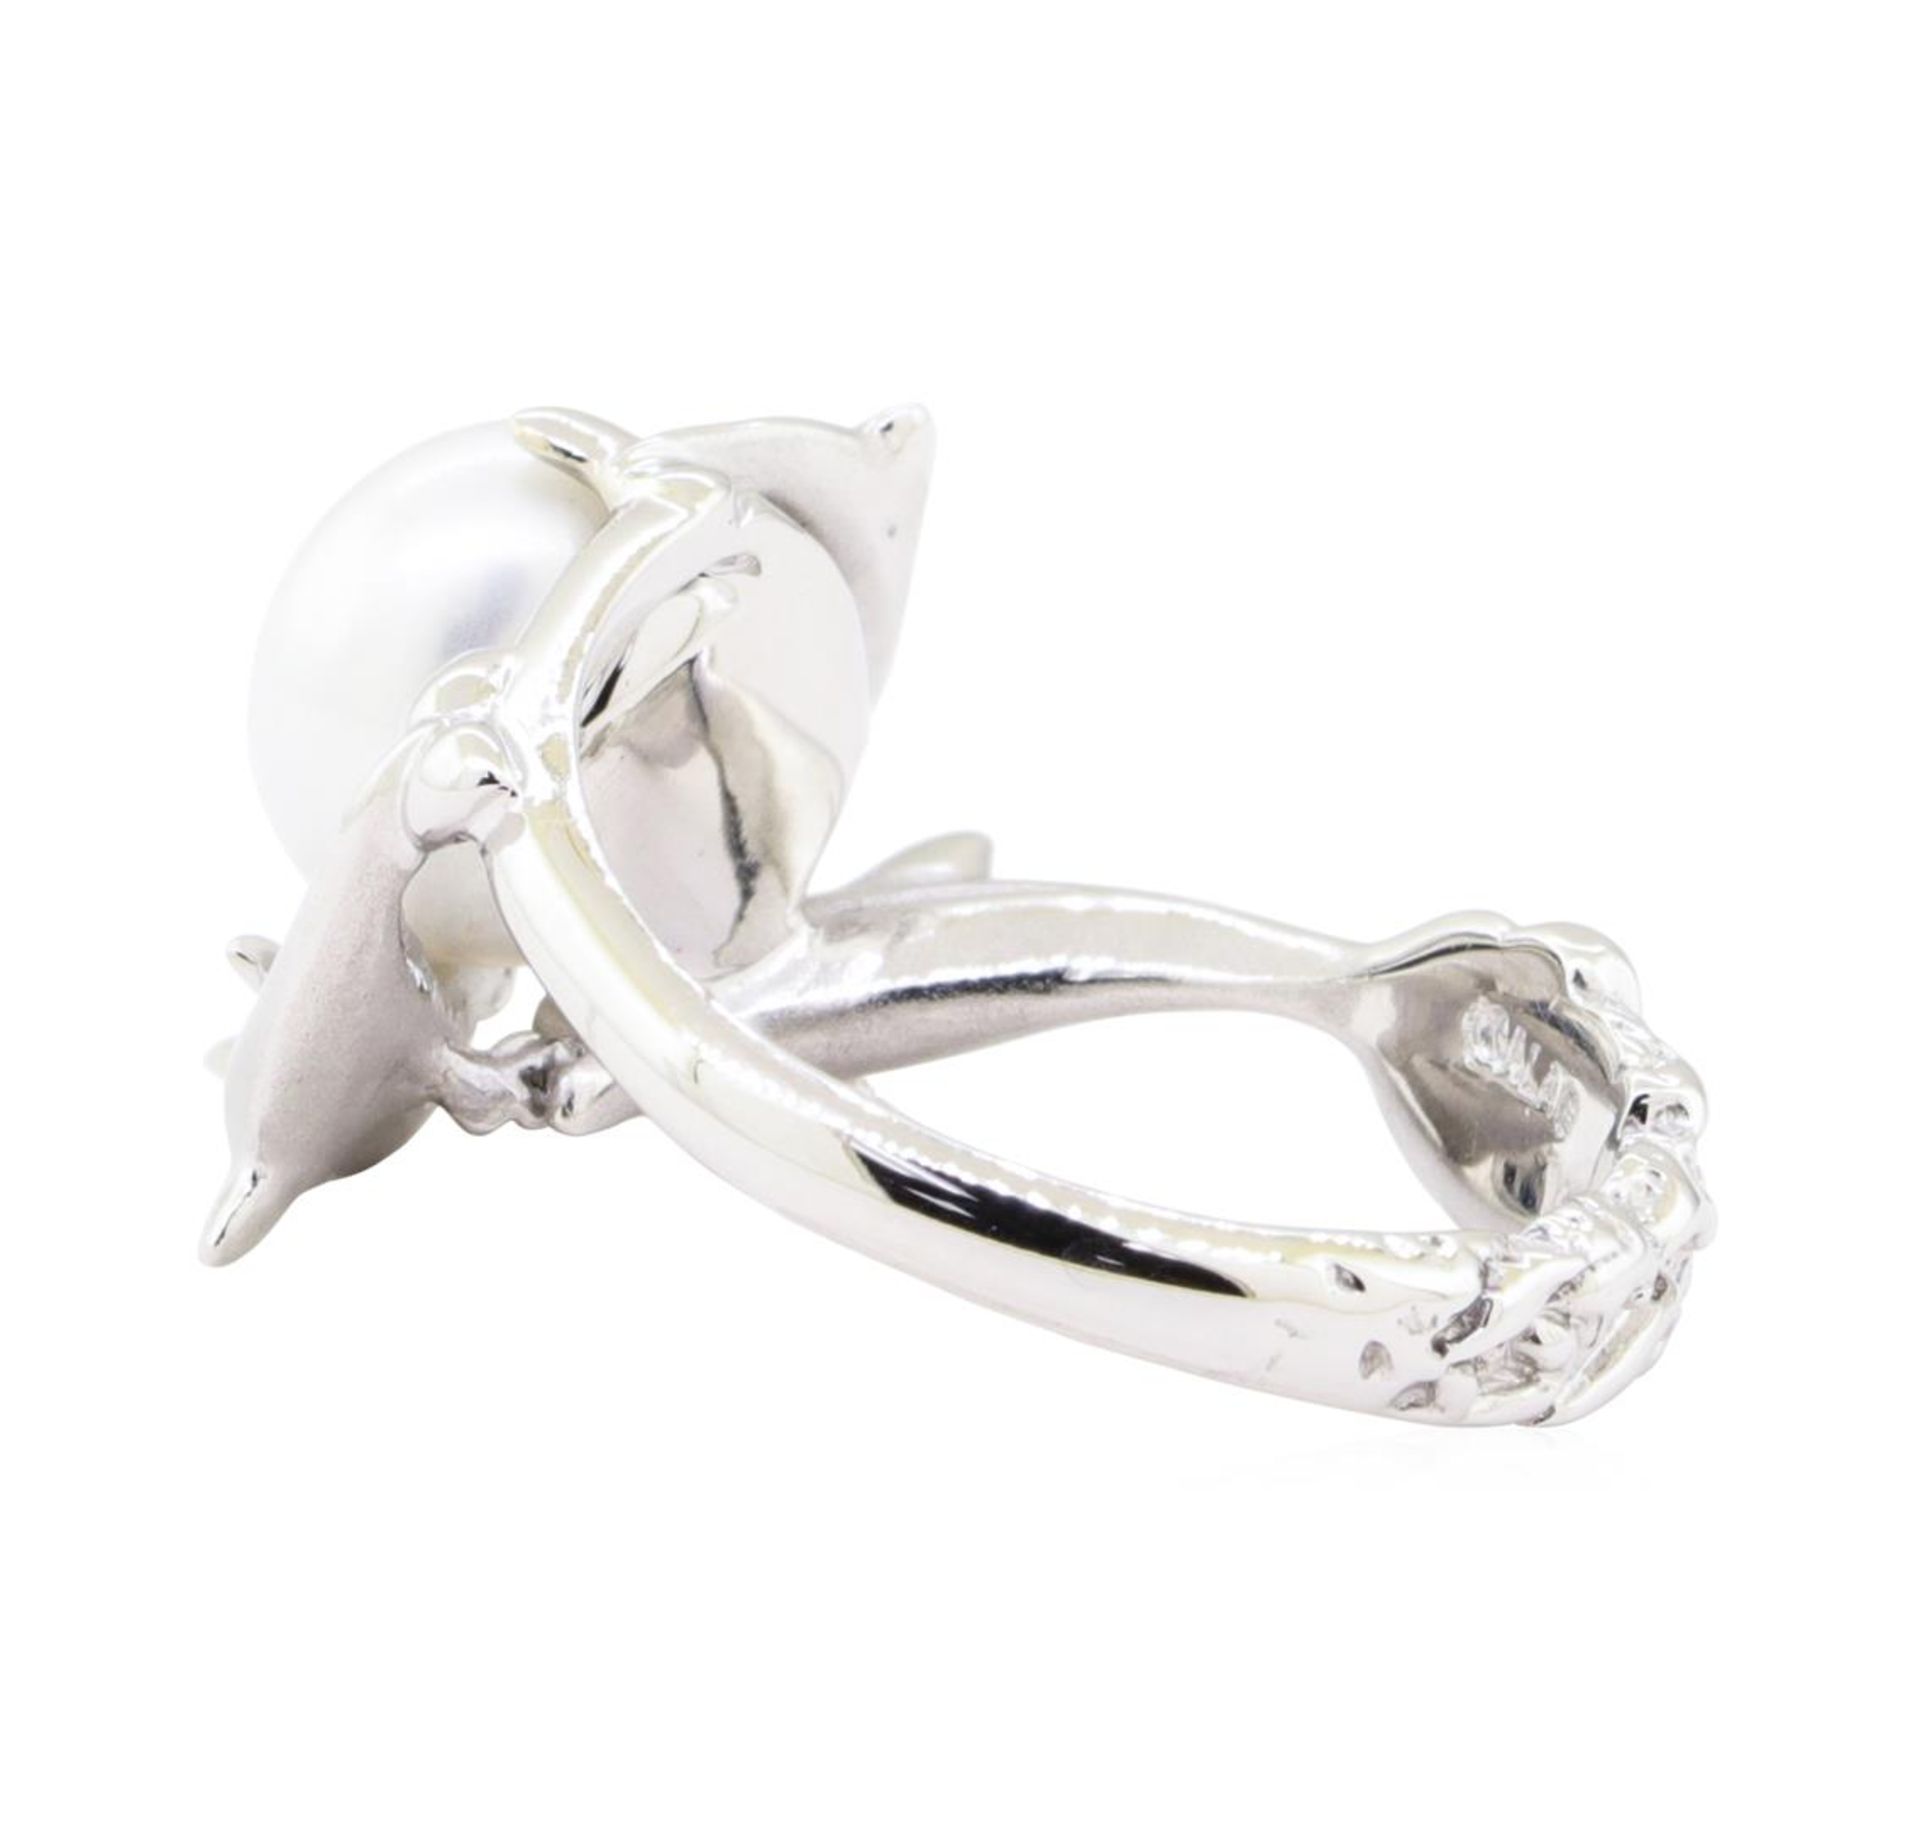 Galatea 0.06ct Diamond and Pearl Ring - 14KT White Gold - Image 3 of 4